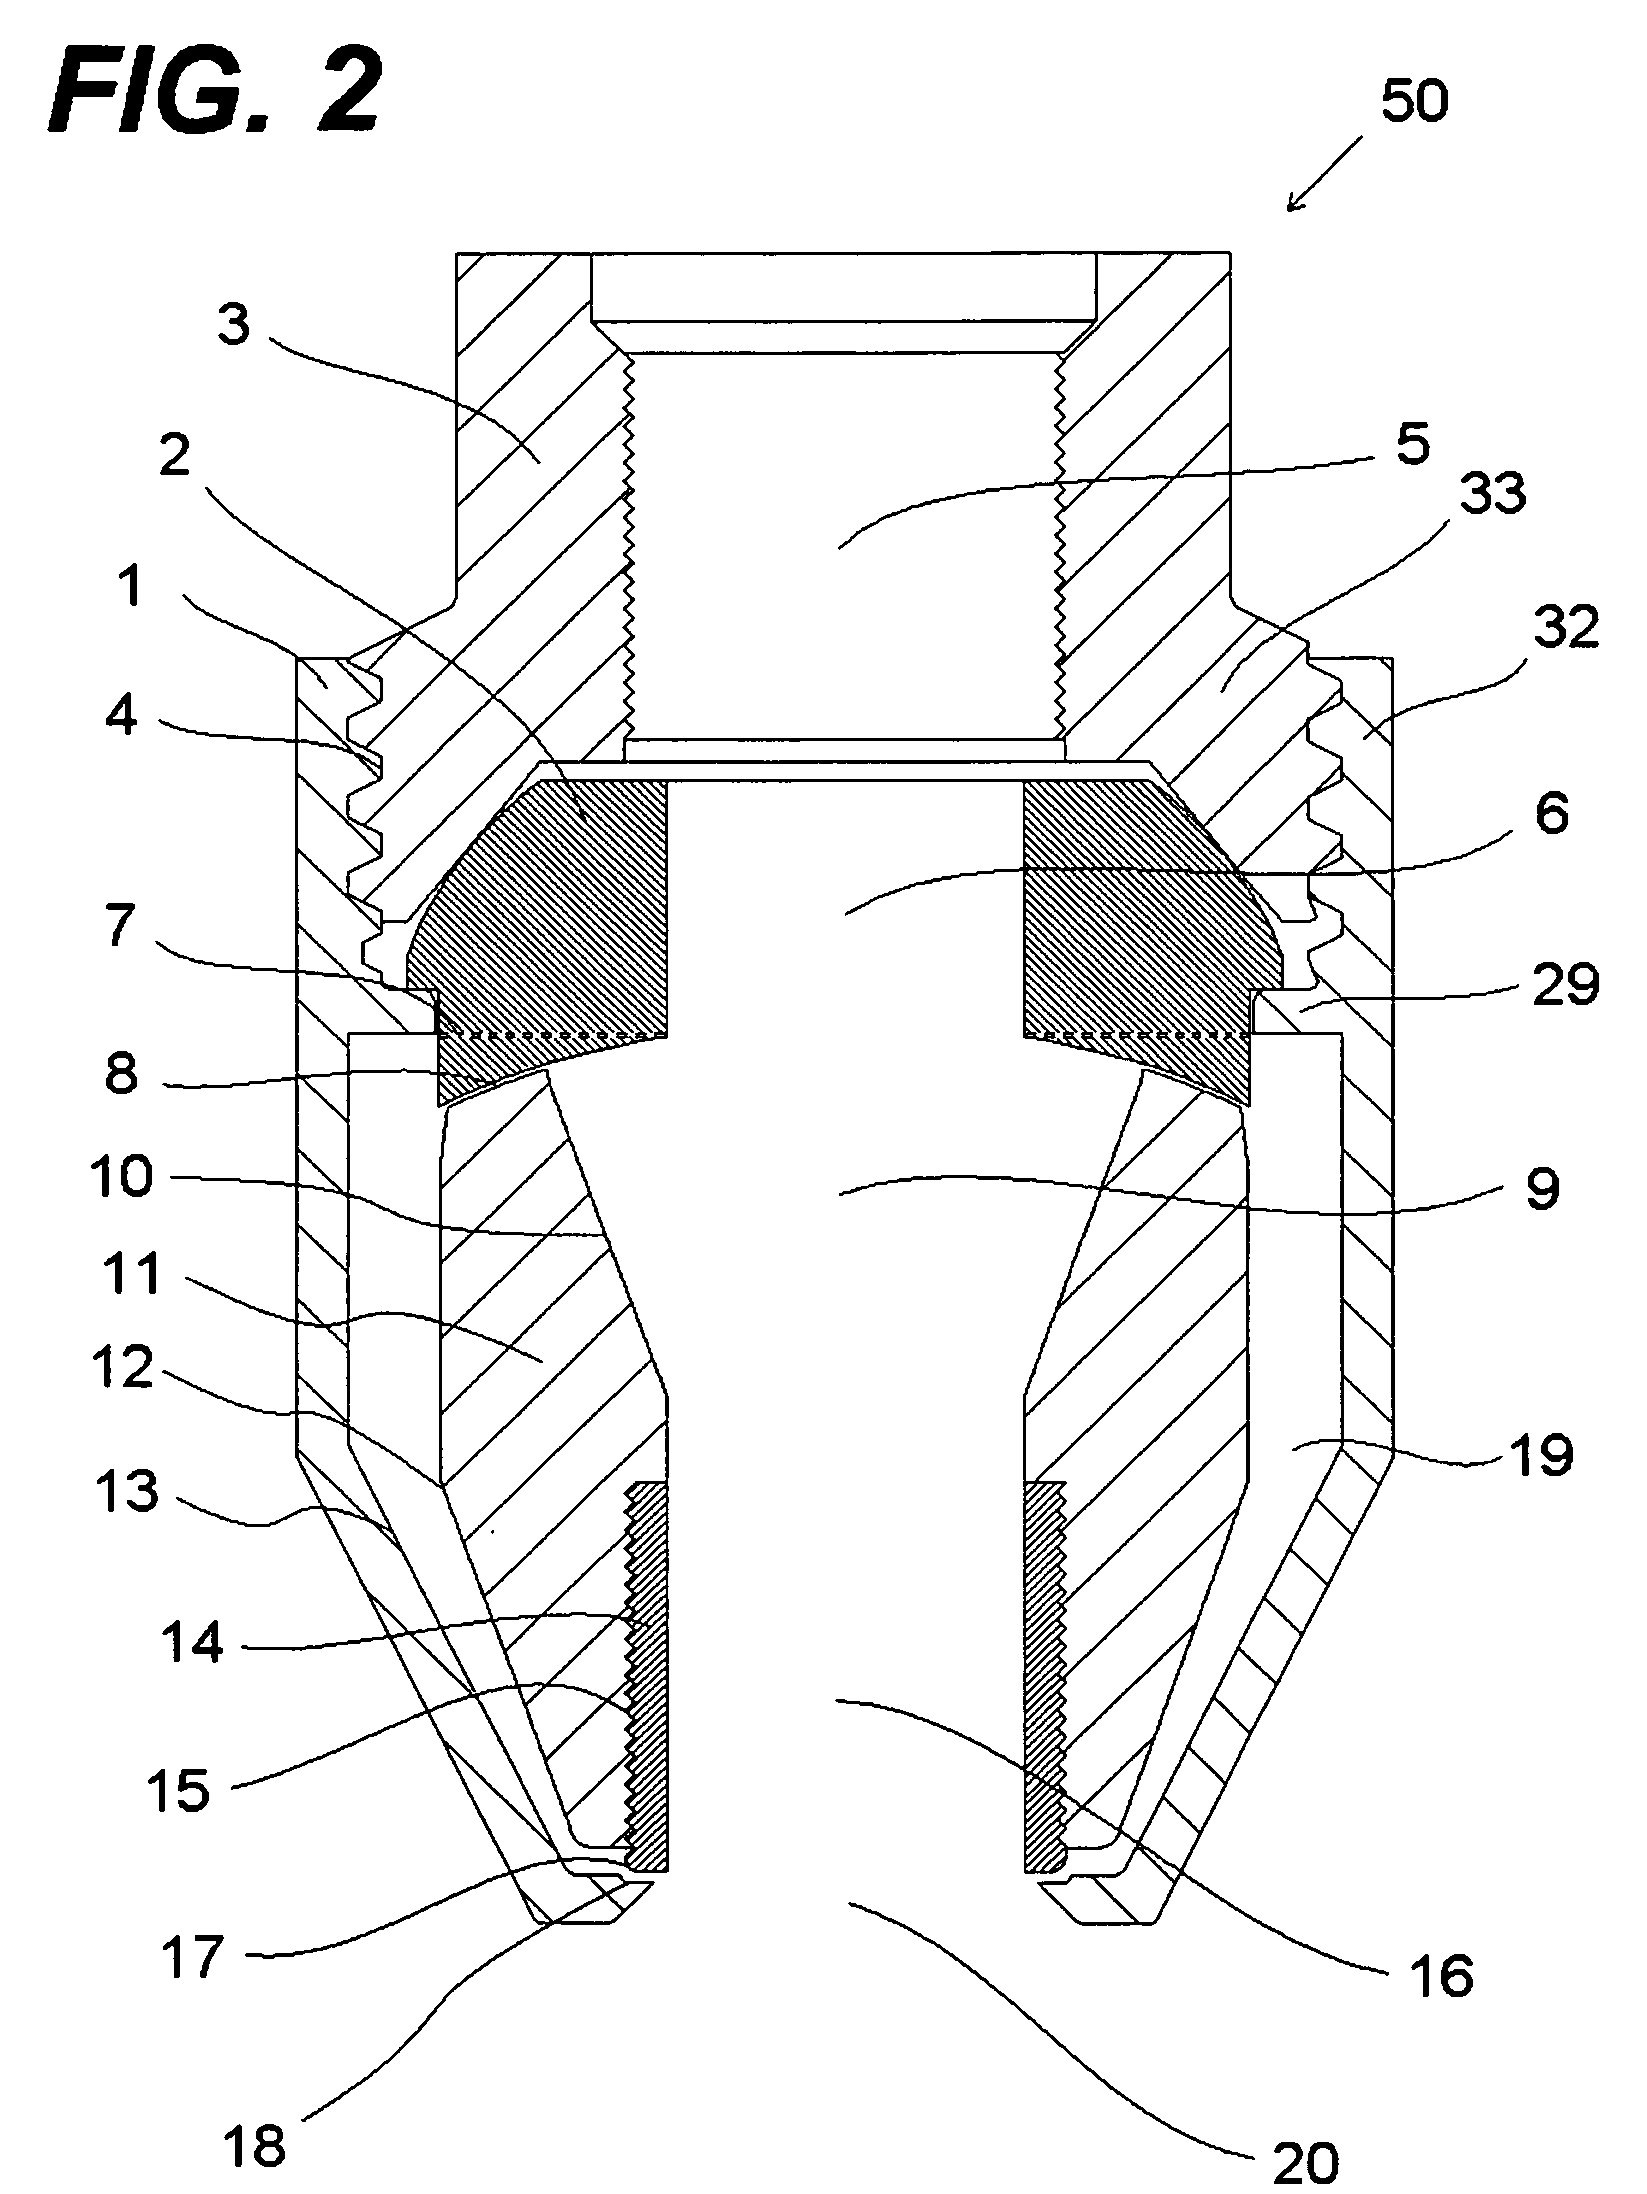 Tool and method for drilling, reaming, and cutting